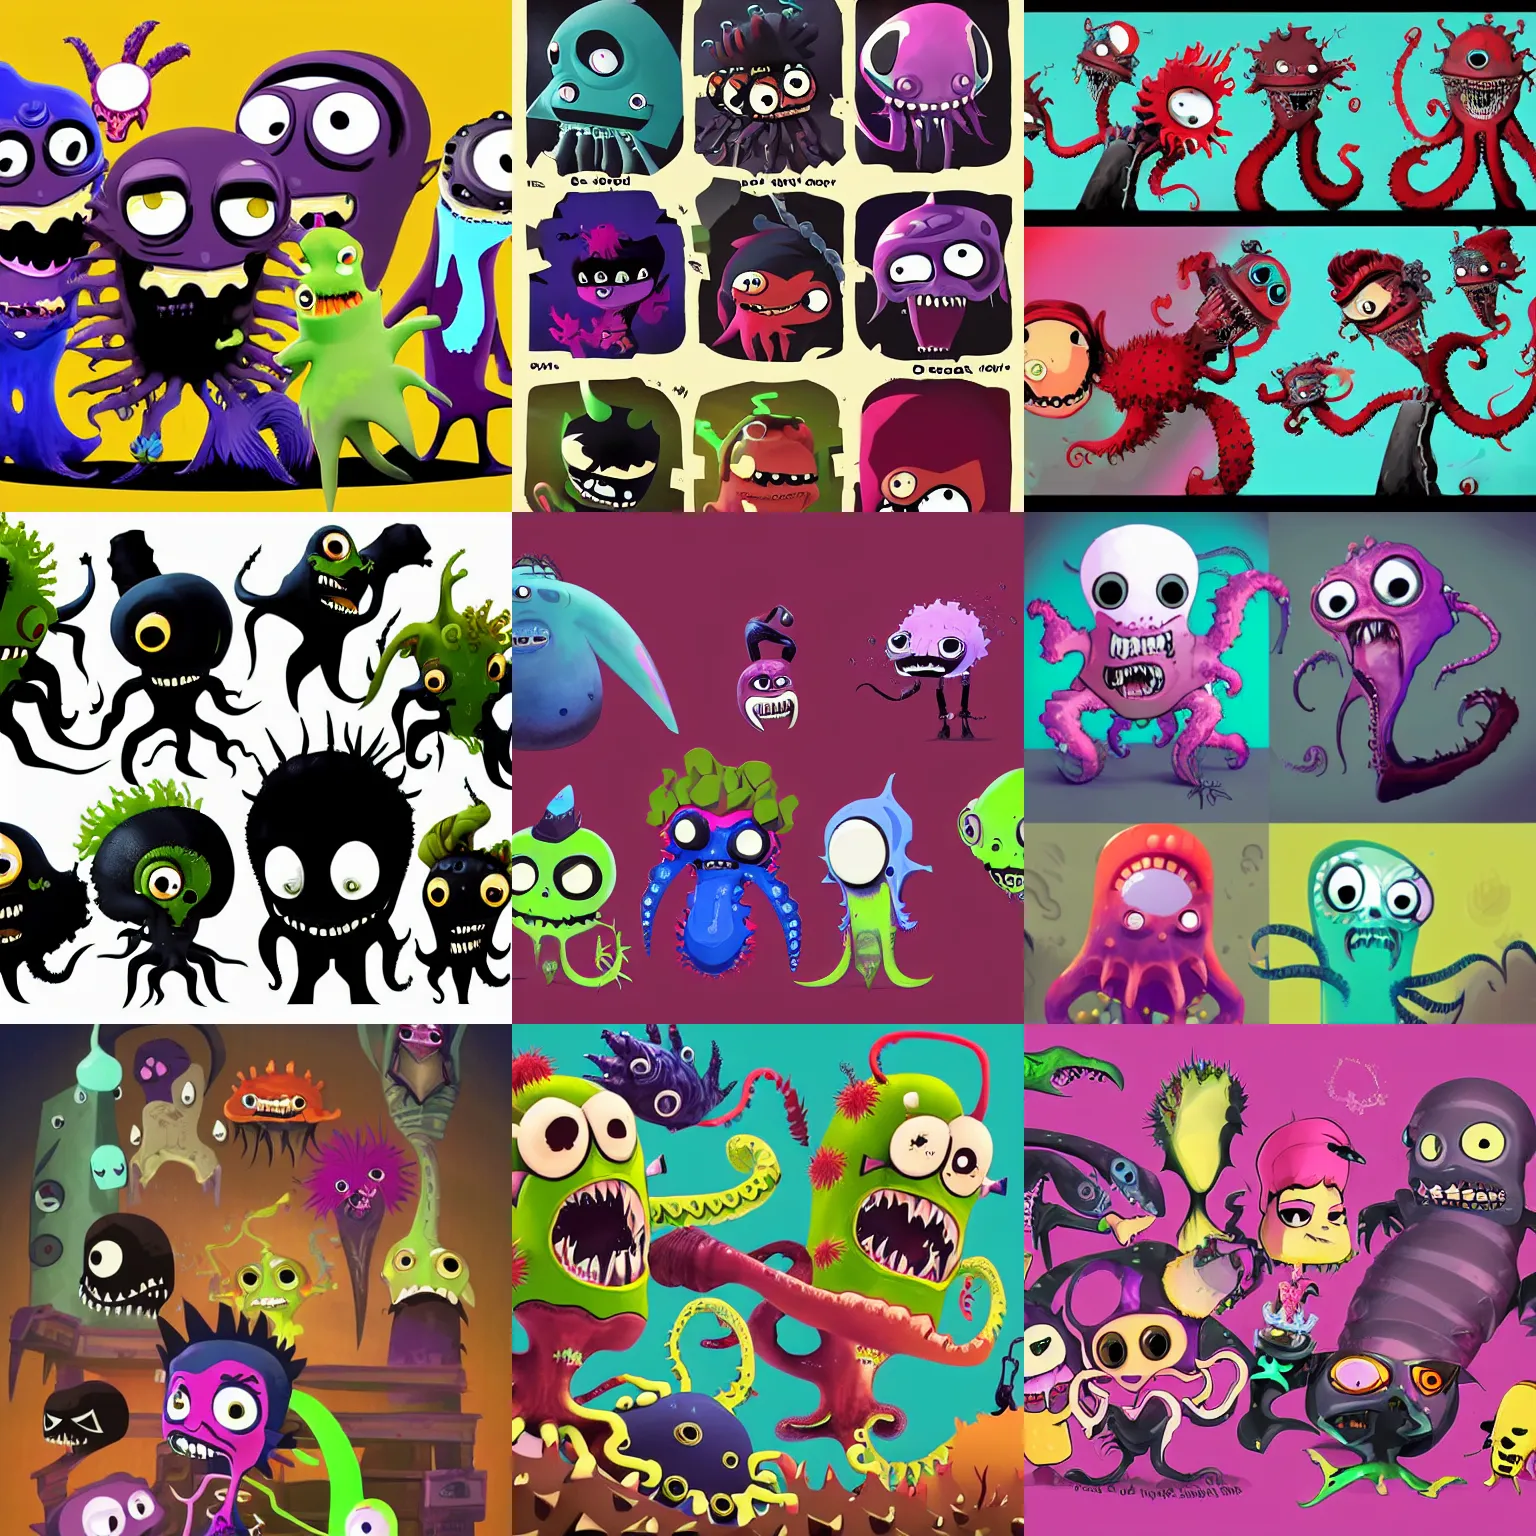 Prompt: punk rock vampiric electrifying rockstar bipedal vampire octopus, angler fish, gulper eel, and sea urchins conceptual character designs of various shapes and sizes by genndy tartakovsky and splatoon by nintendo and the psychonauts franchise by doublefine tim shafer artists for the new hotel transylvania film